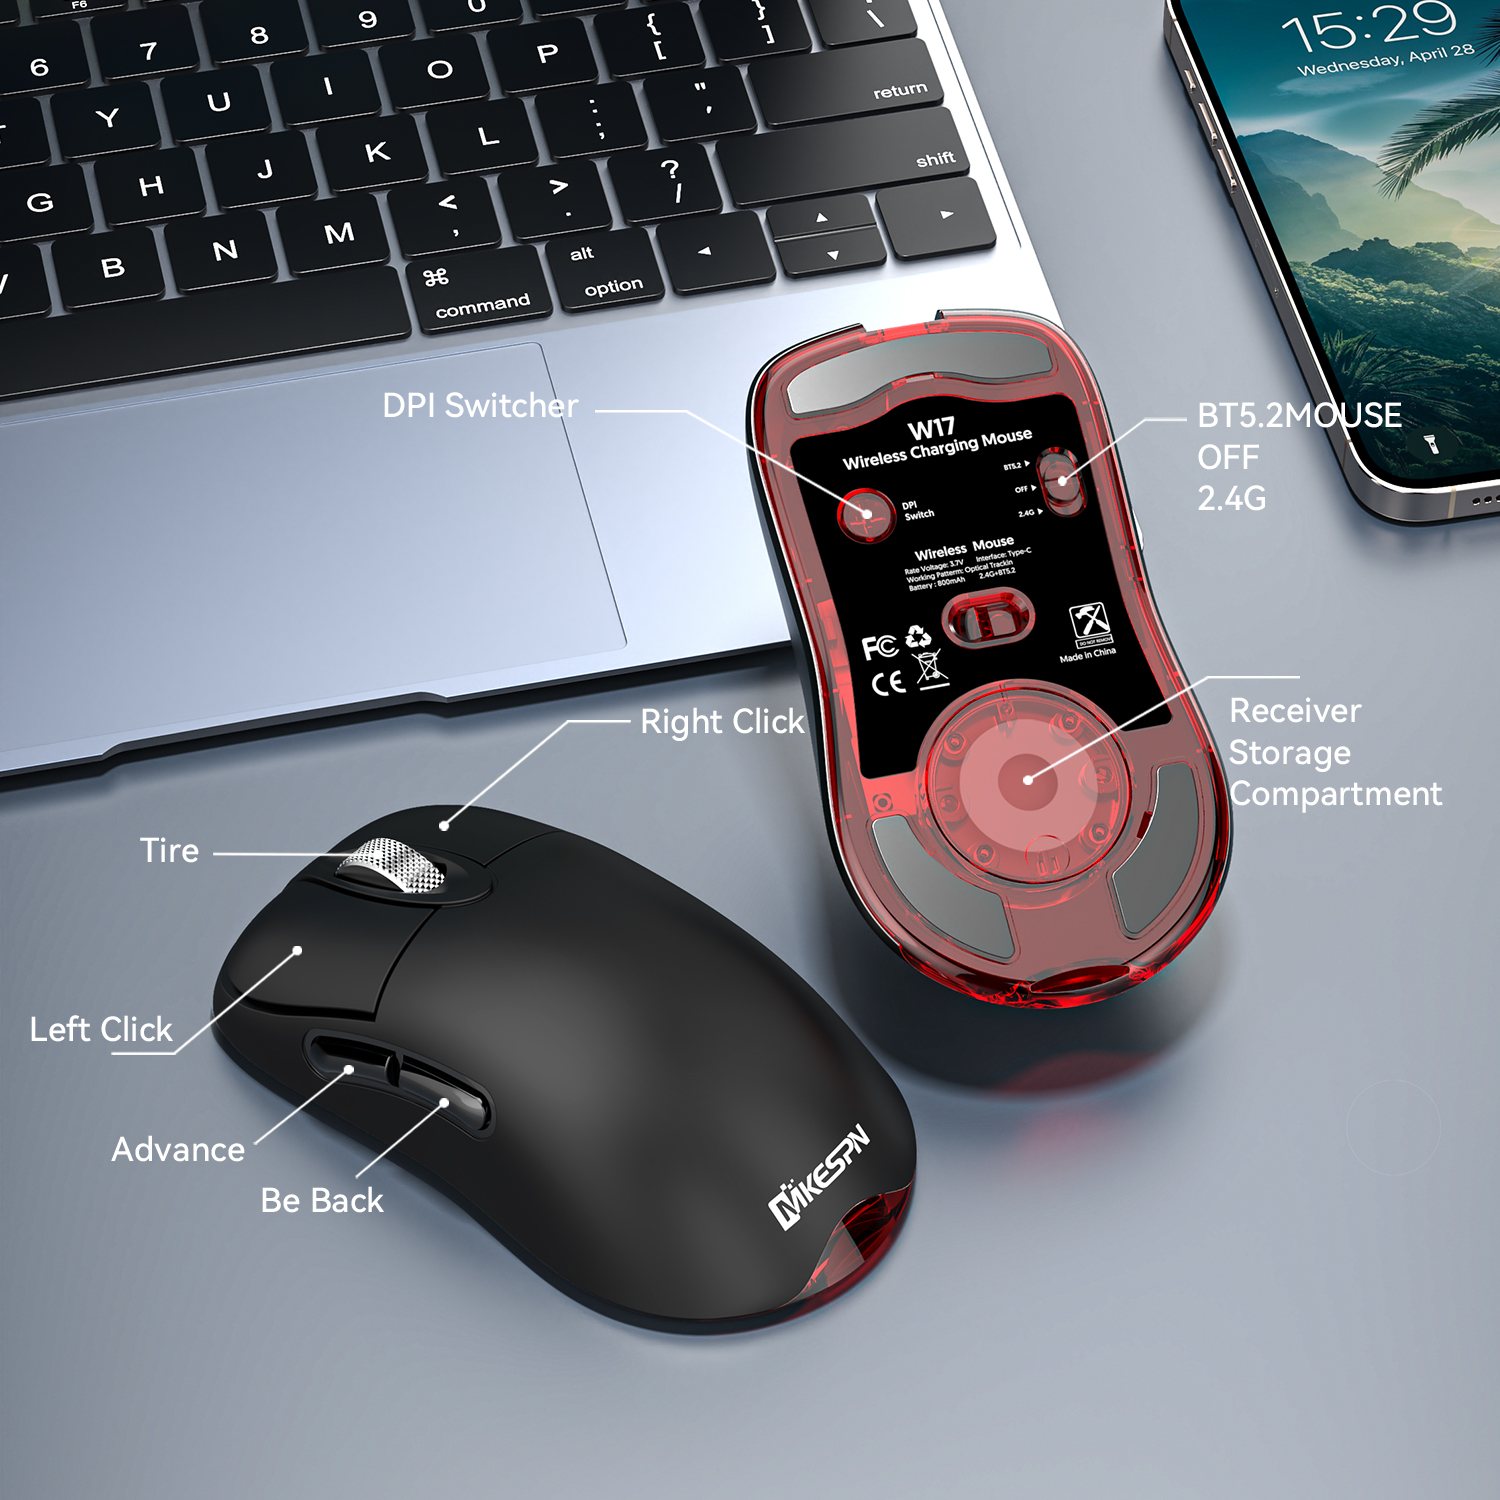 W17 wireless gaming mouse